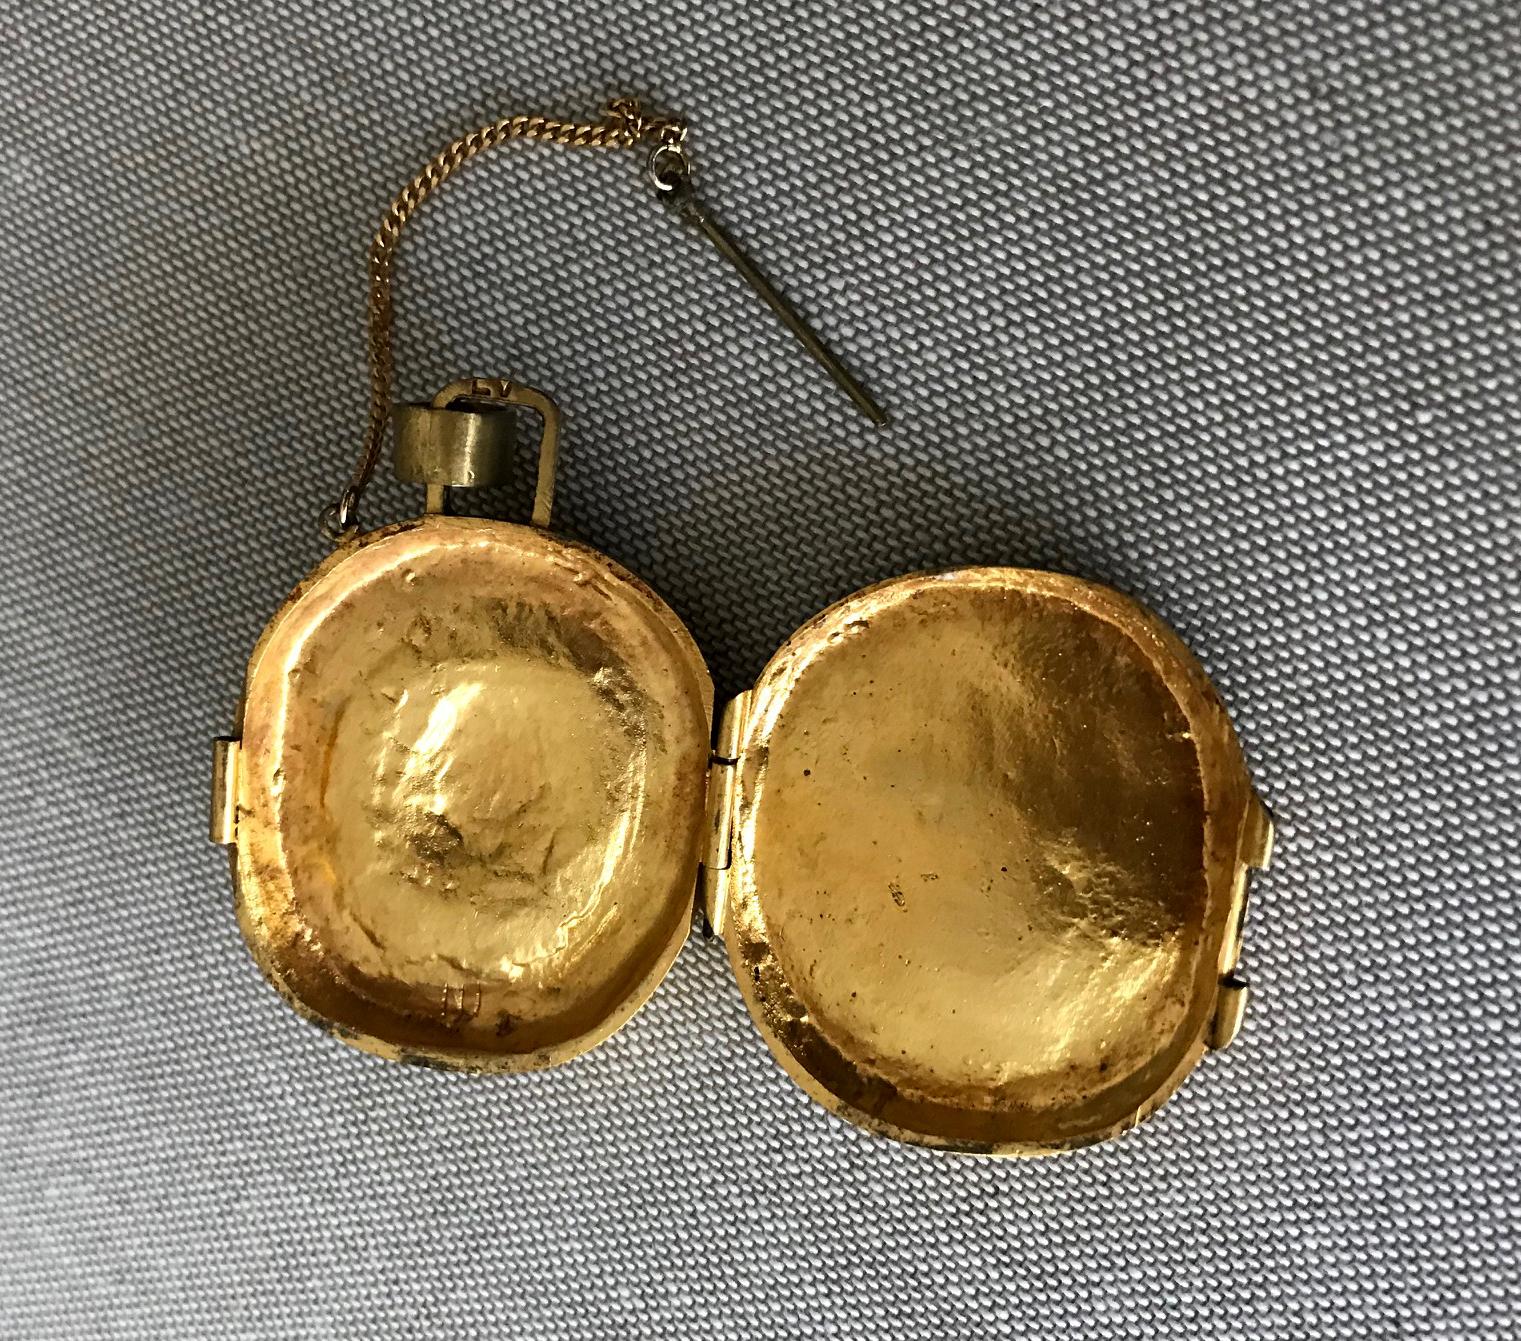 A piece of wonderful jewelry by Line Vautrin designed in 1941 on the subject of St Foi, a child martyr on the early fourth century and the patron saint of prinsoers, in a rare form of a reliquary pendant with a lock pin attached to a chain. The